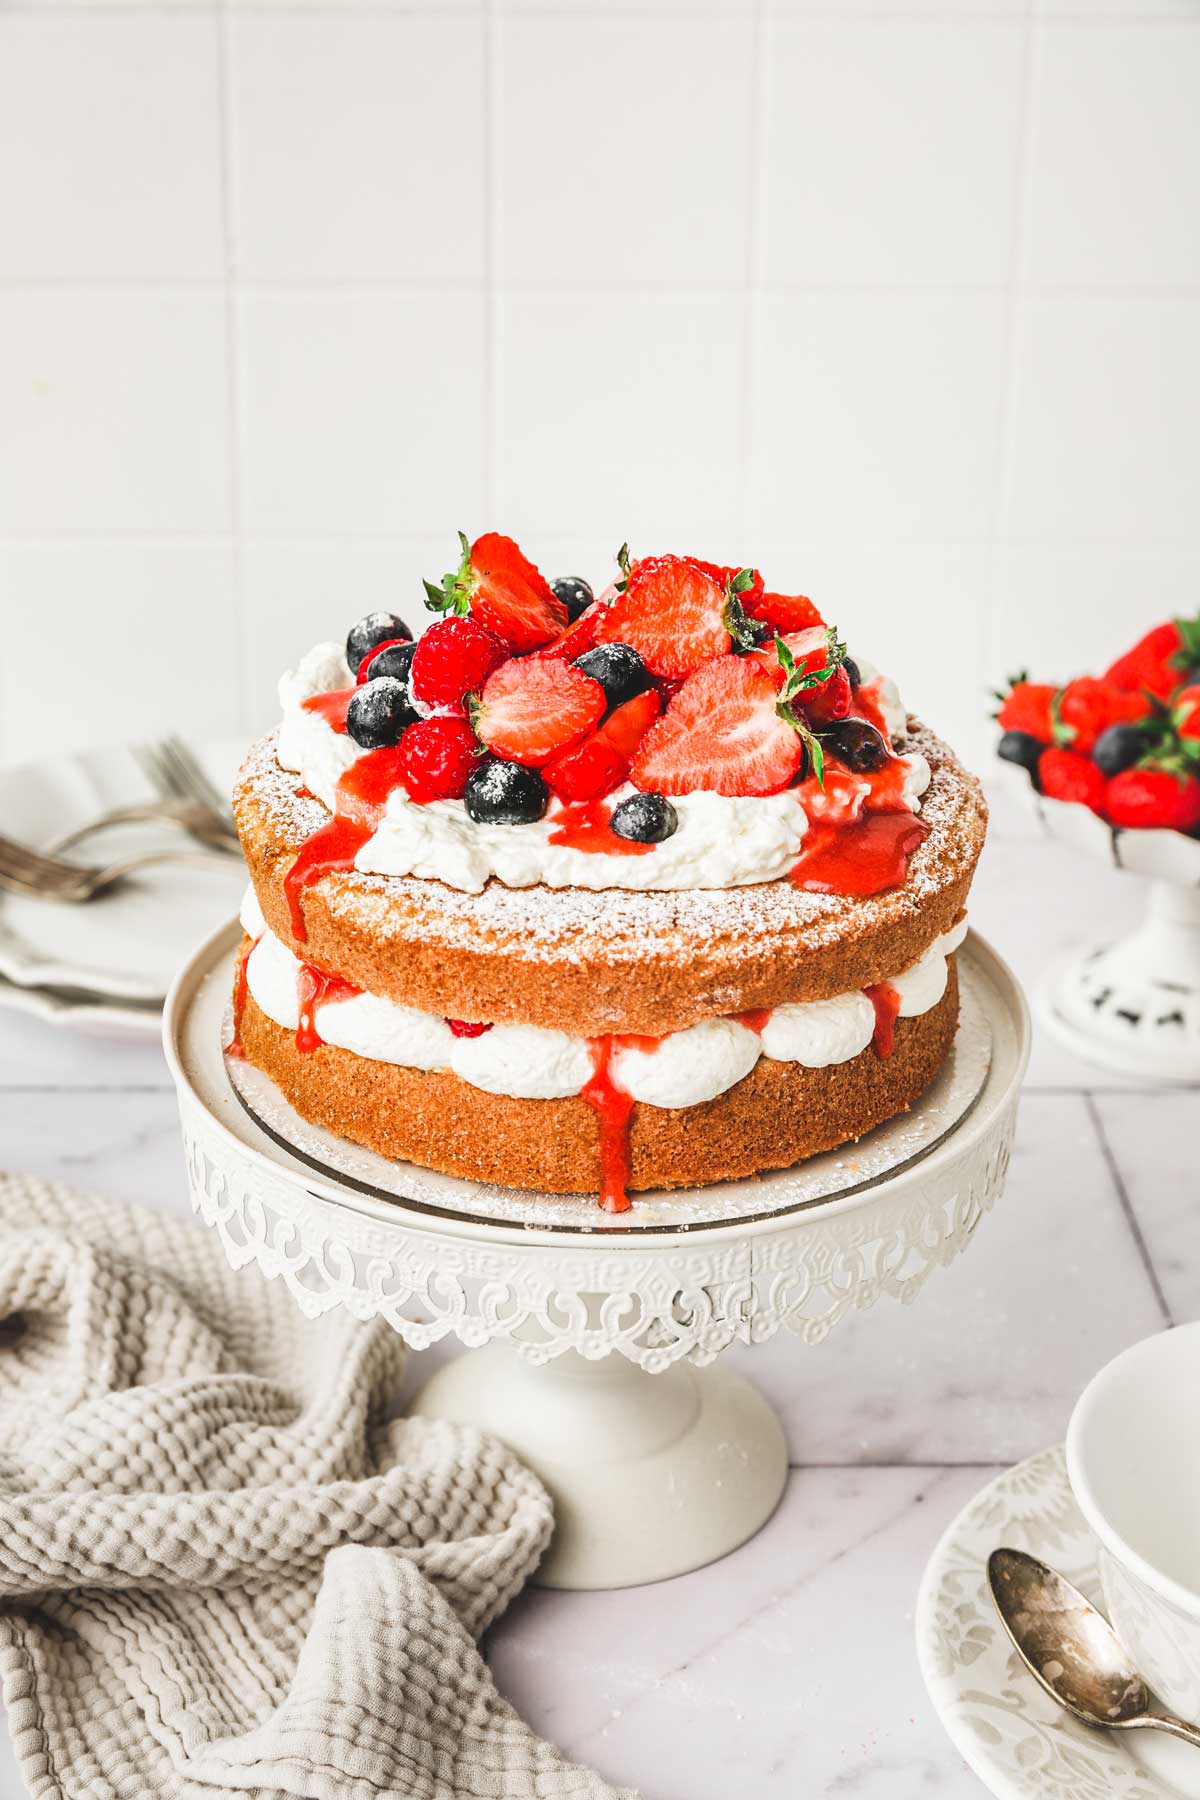 Classic Victoria Sponge Cake with a Jam and Cream Filling